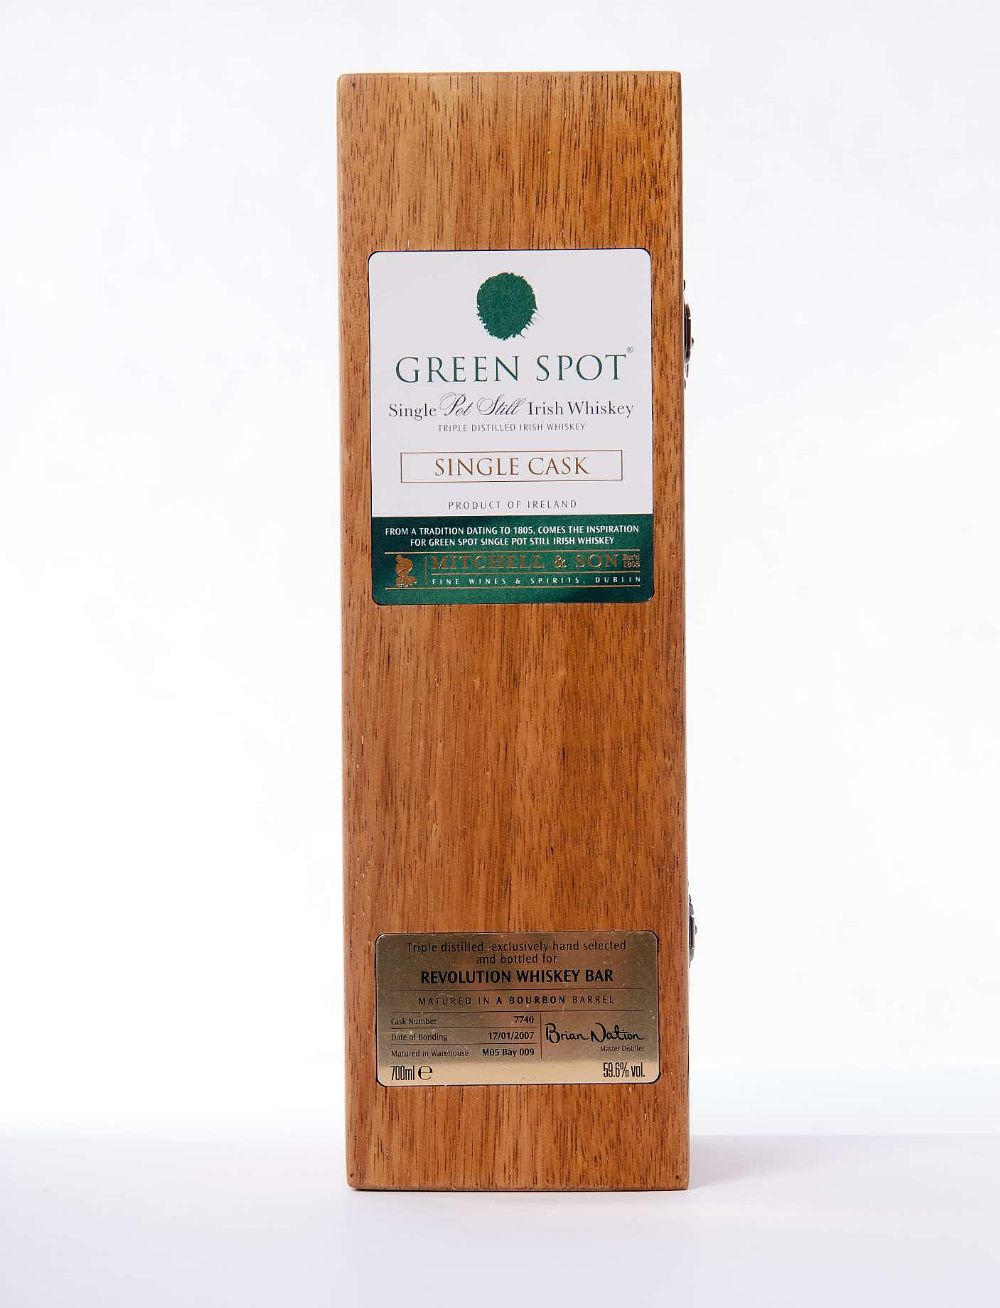 CHARITY BOTTLE - Green Spot Single Cask, Revolution Whiskey Bar (in aid of Solas Cancer Support Centre Waterford)